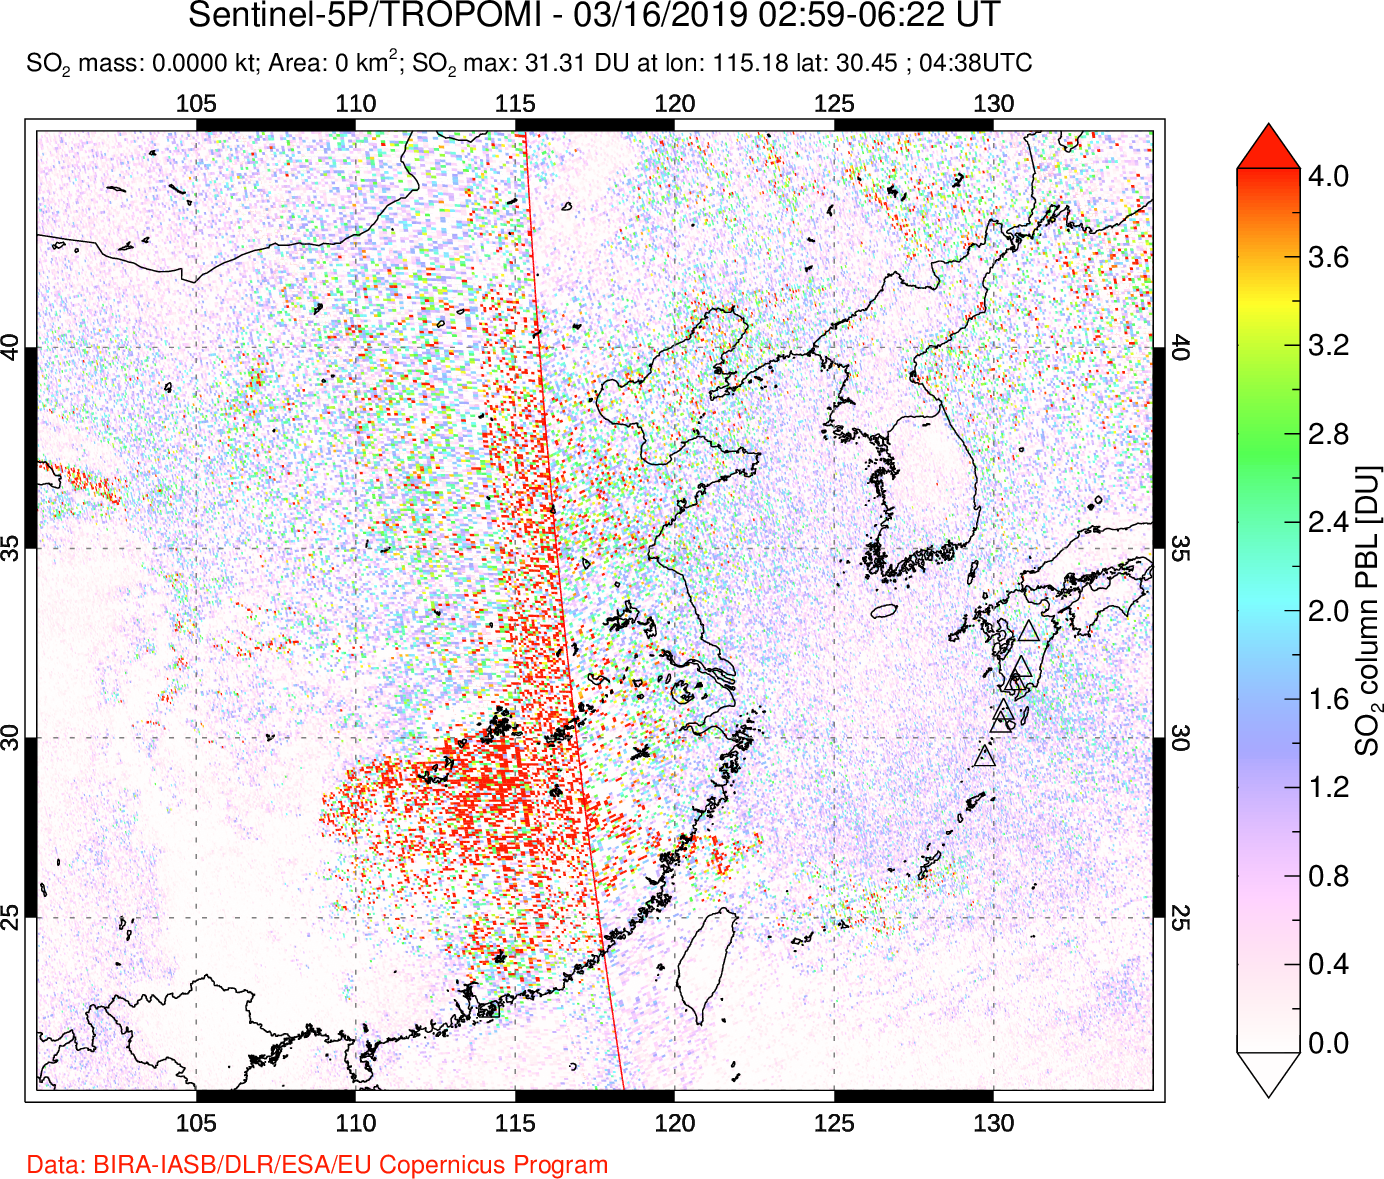 A sulfur dioxide image over Eastern China on Mar 16, 2019.